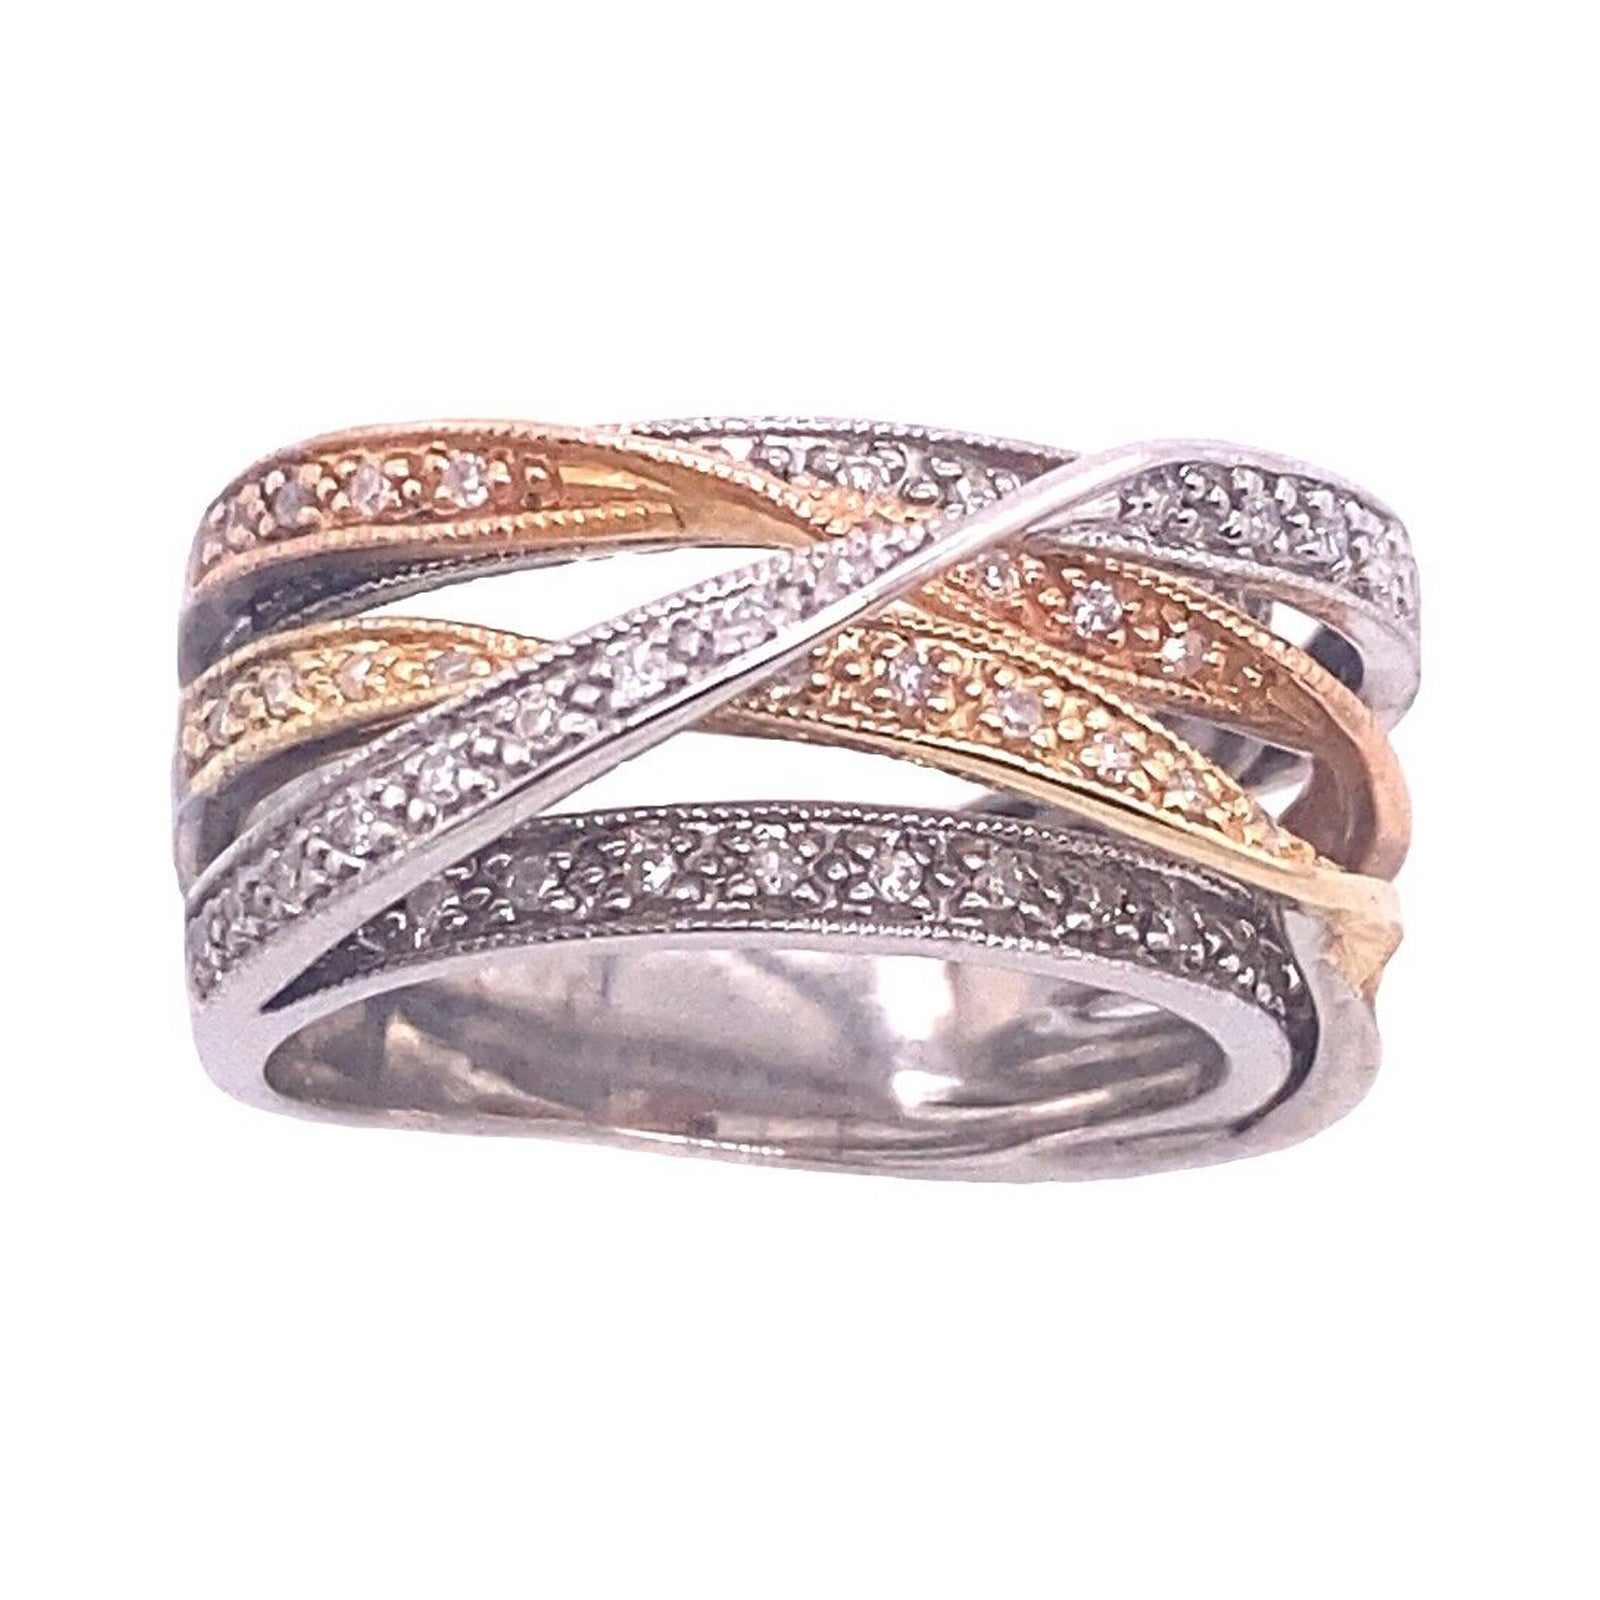 3-Colour Gold 14ct Dress Ring Set with 0.25ct Round Diamonds